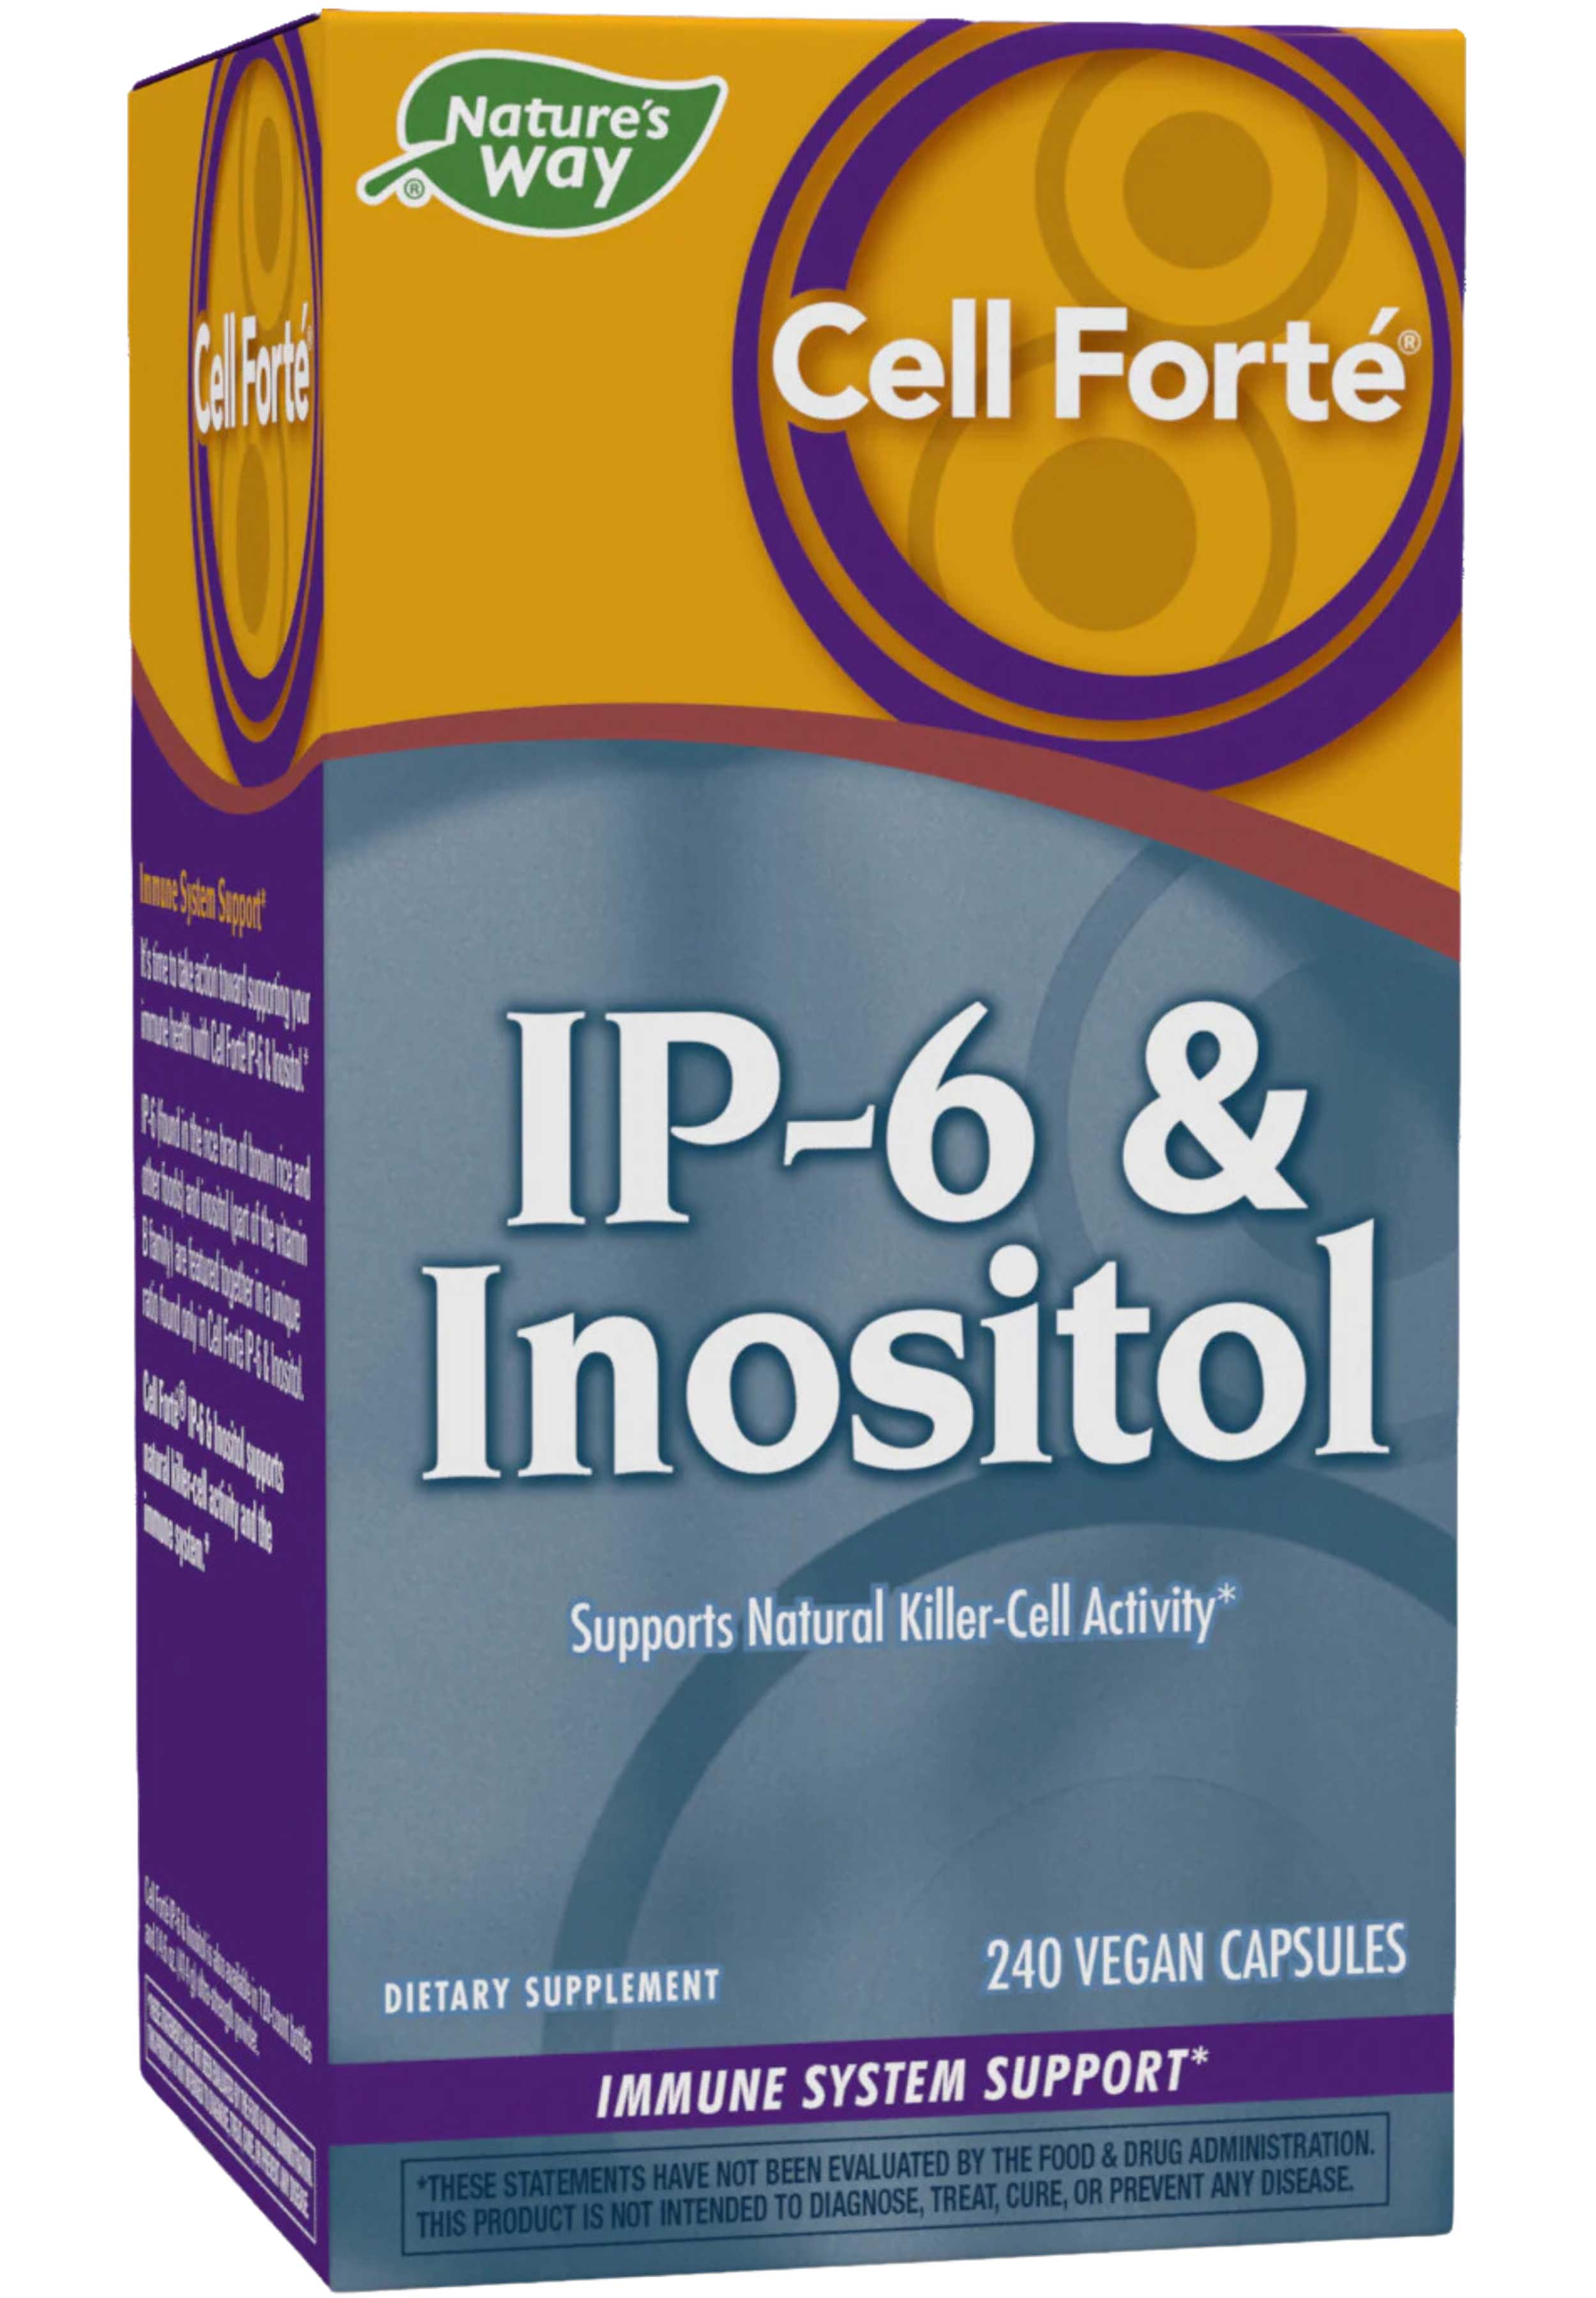 Nature's Way Cell Forté IP-6 & Inositol (Formerly Enzymatic Therapy Cell Forté IP-6 & Inositol)